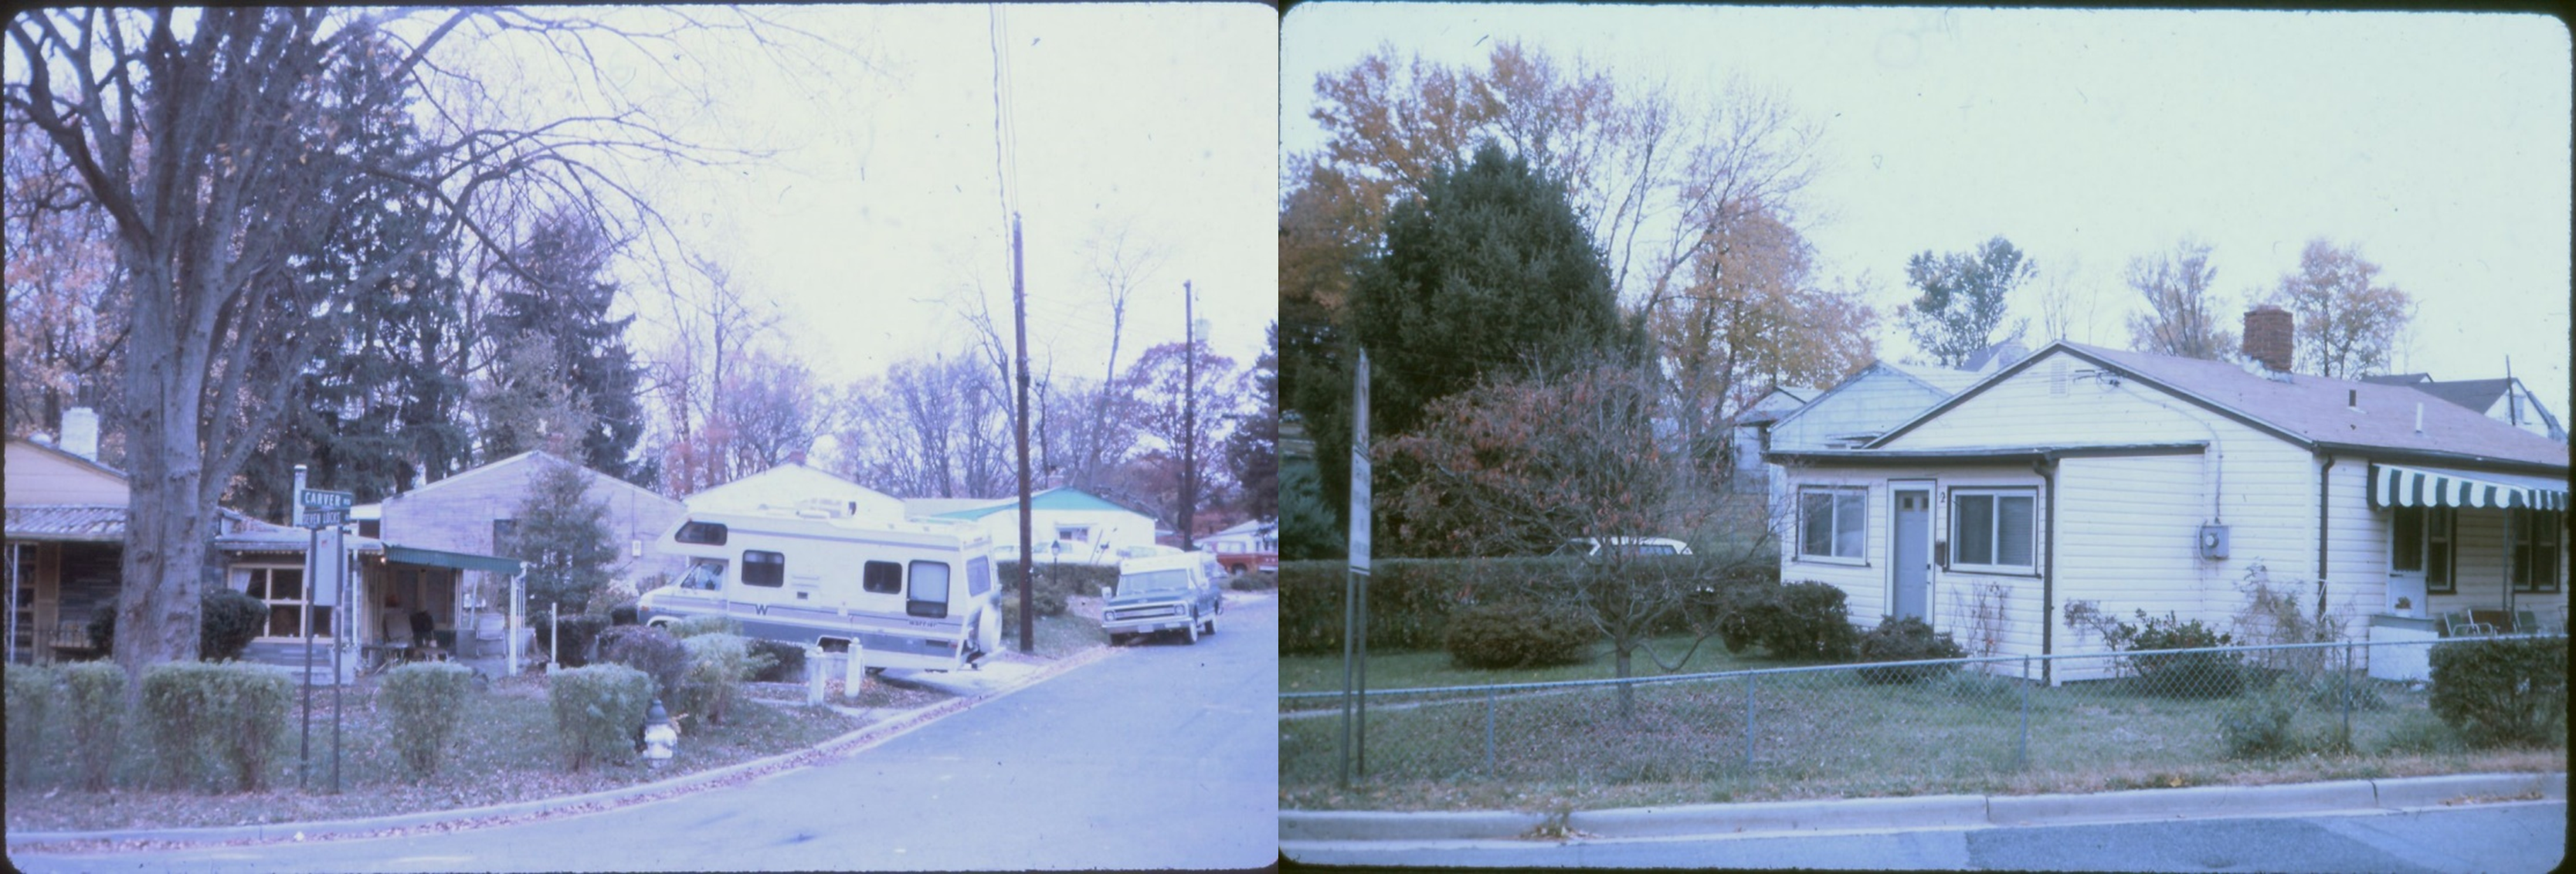 Color photos of temporary housing on Carver Rd. Left image is a row of houses with trees, telephone poles, and vehicles lining street. Right image is upclose of a light colored house with 4 windows, 2 doors, and chainlink fence around yard & trees behind